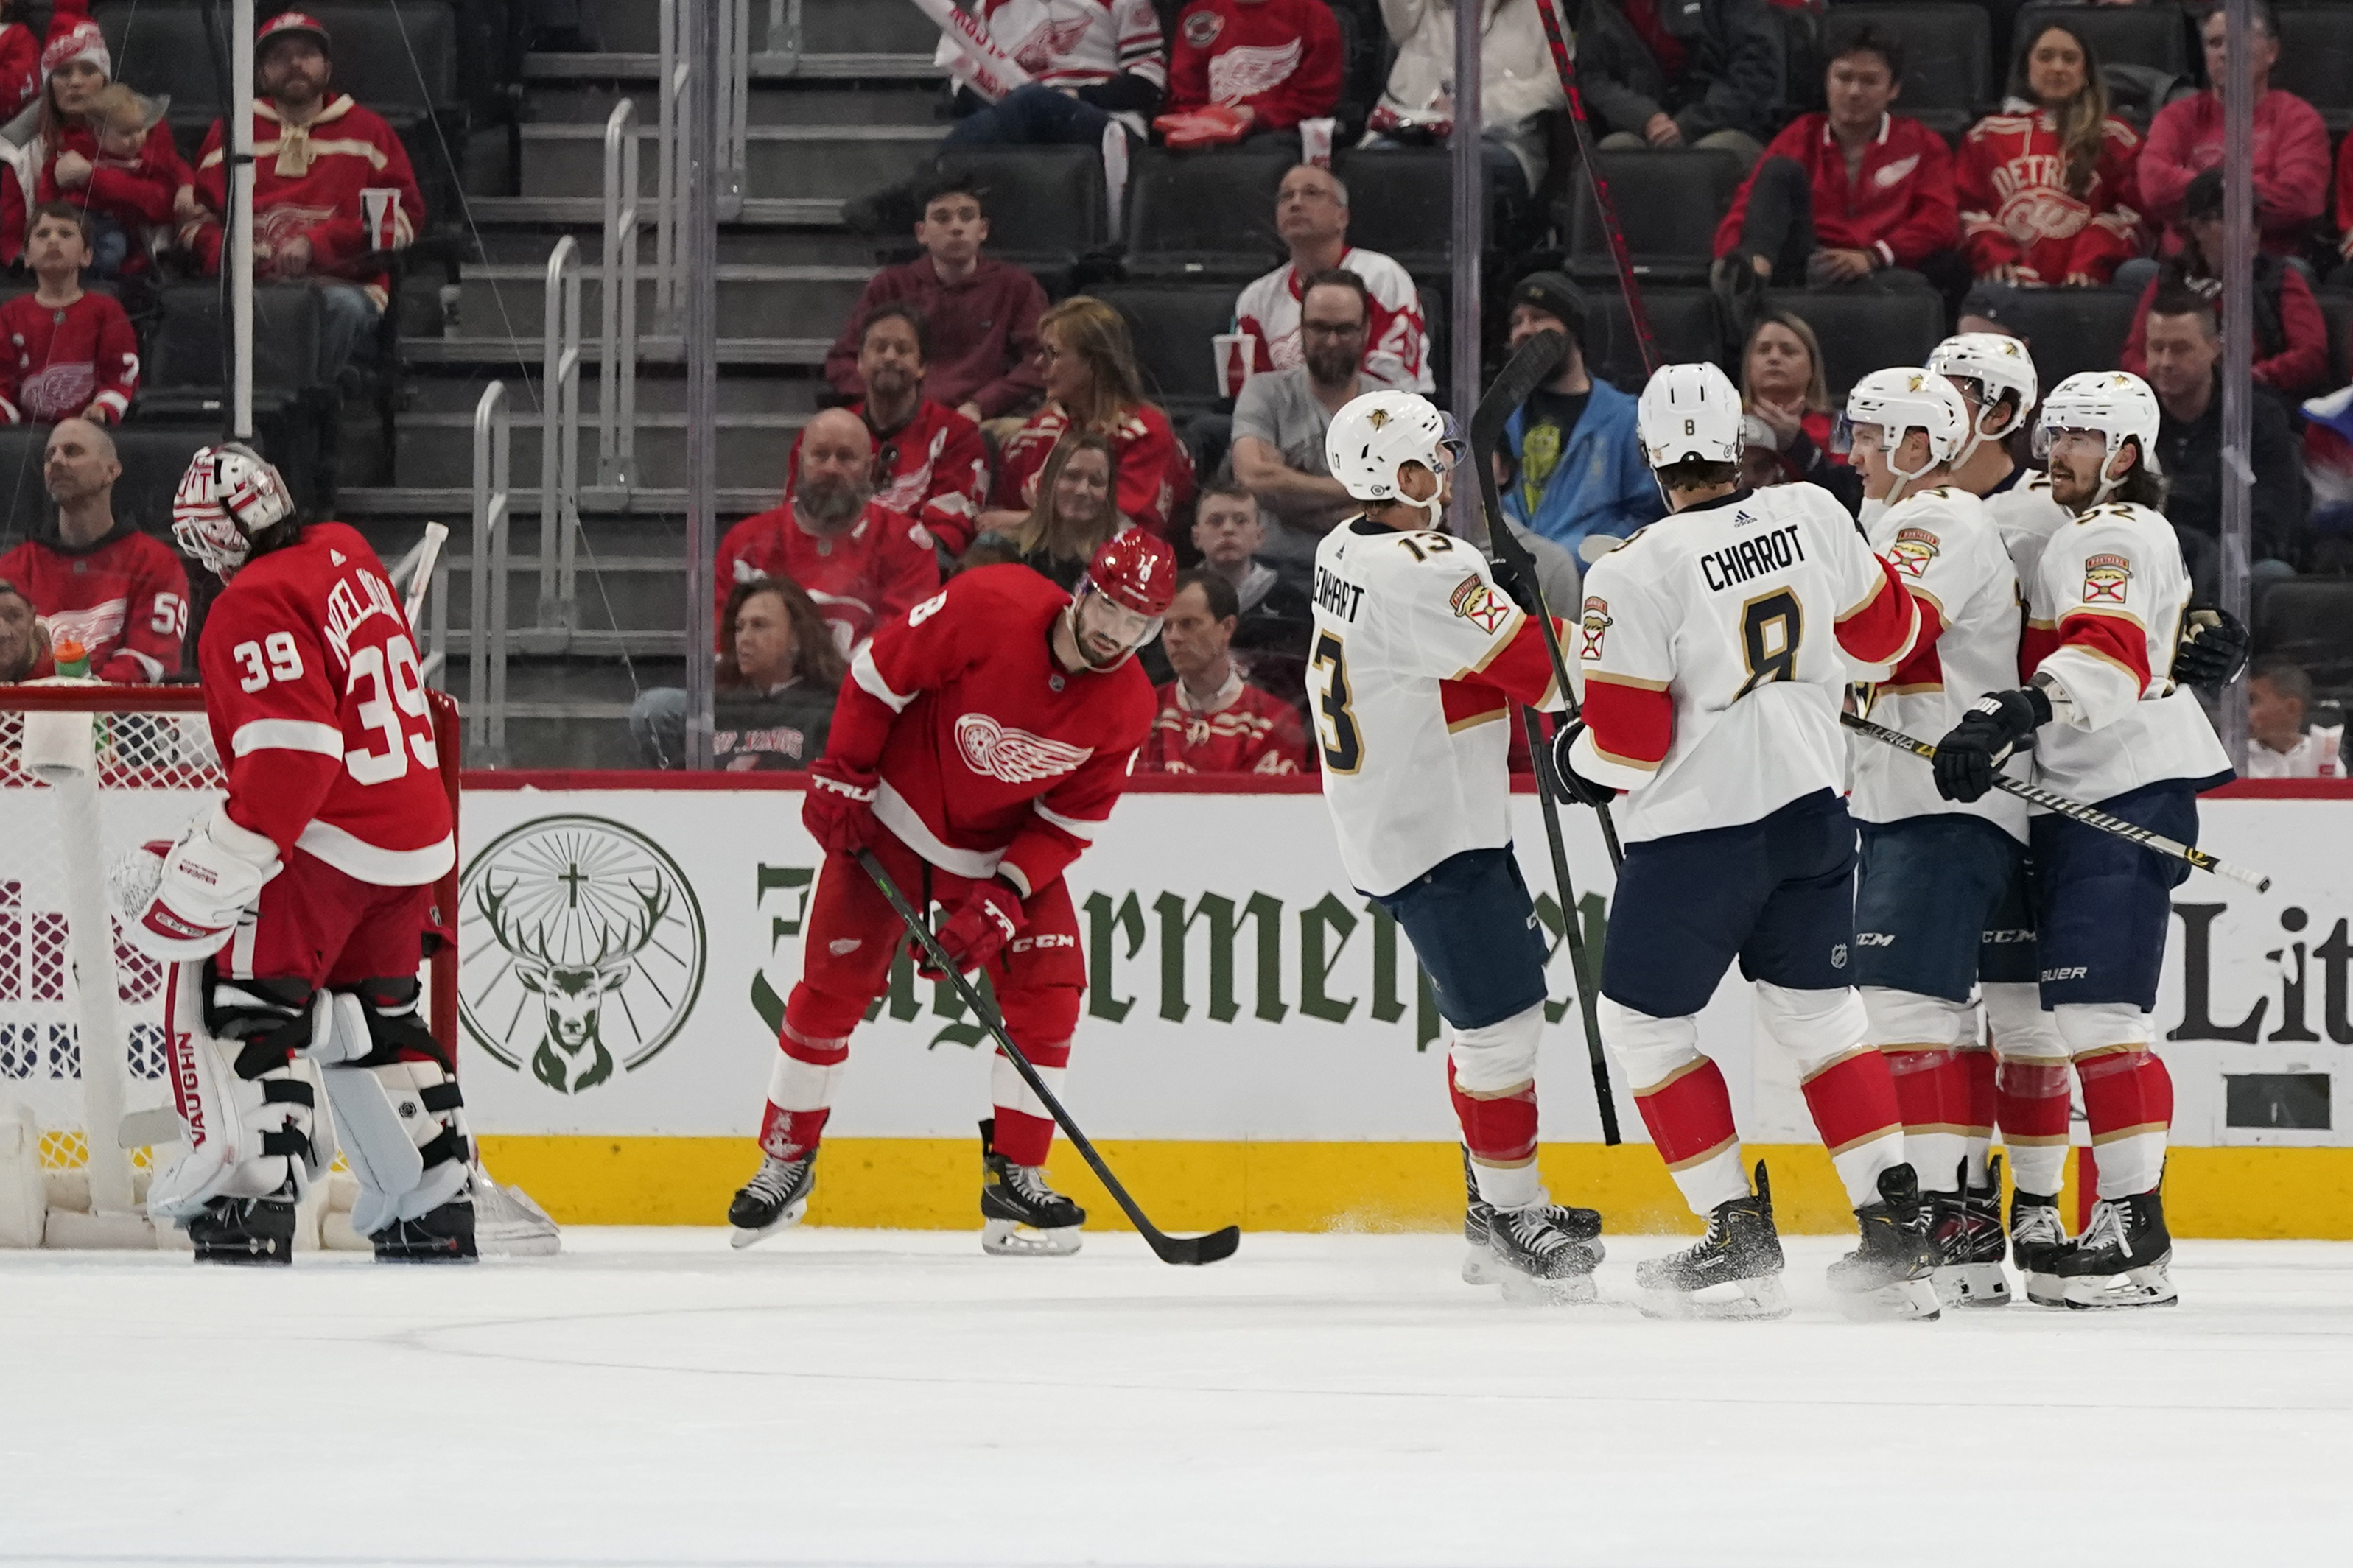 Panthers' win streak reaches 10 games with rout of Red Wings